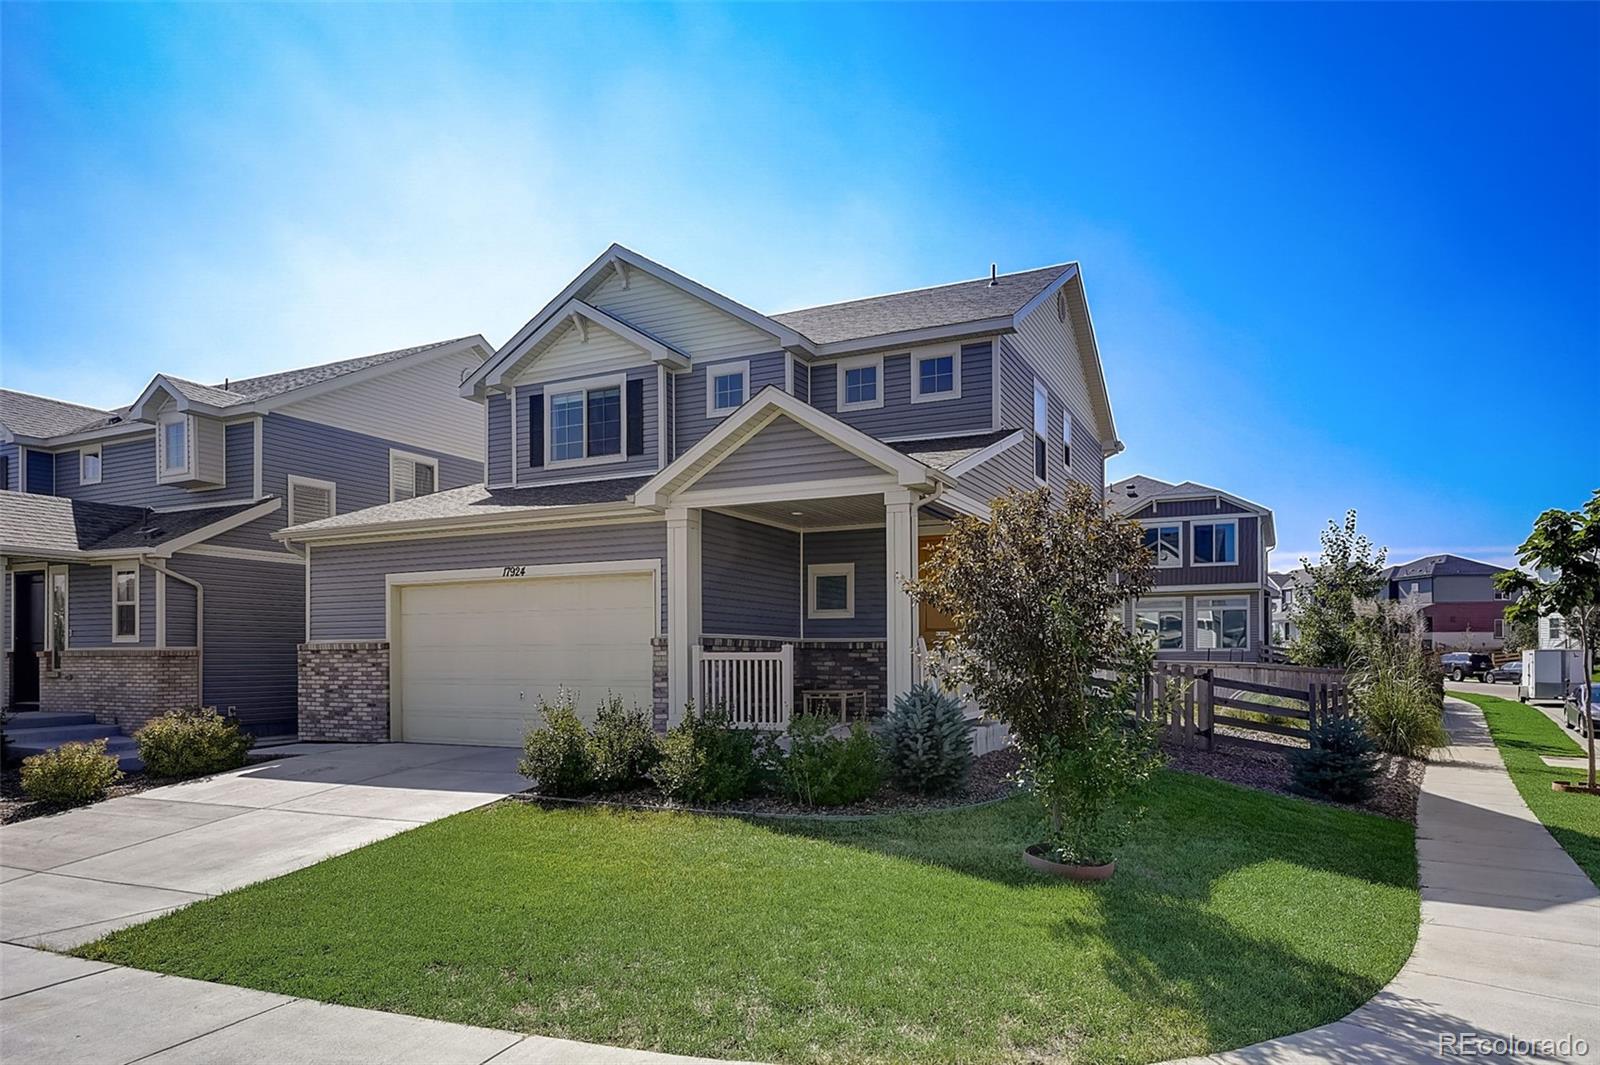 17924 E 107th Place, commerce city MLS: 6720485 Beds: 3 Baths: 4 Price: $545,000